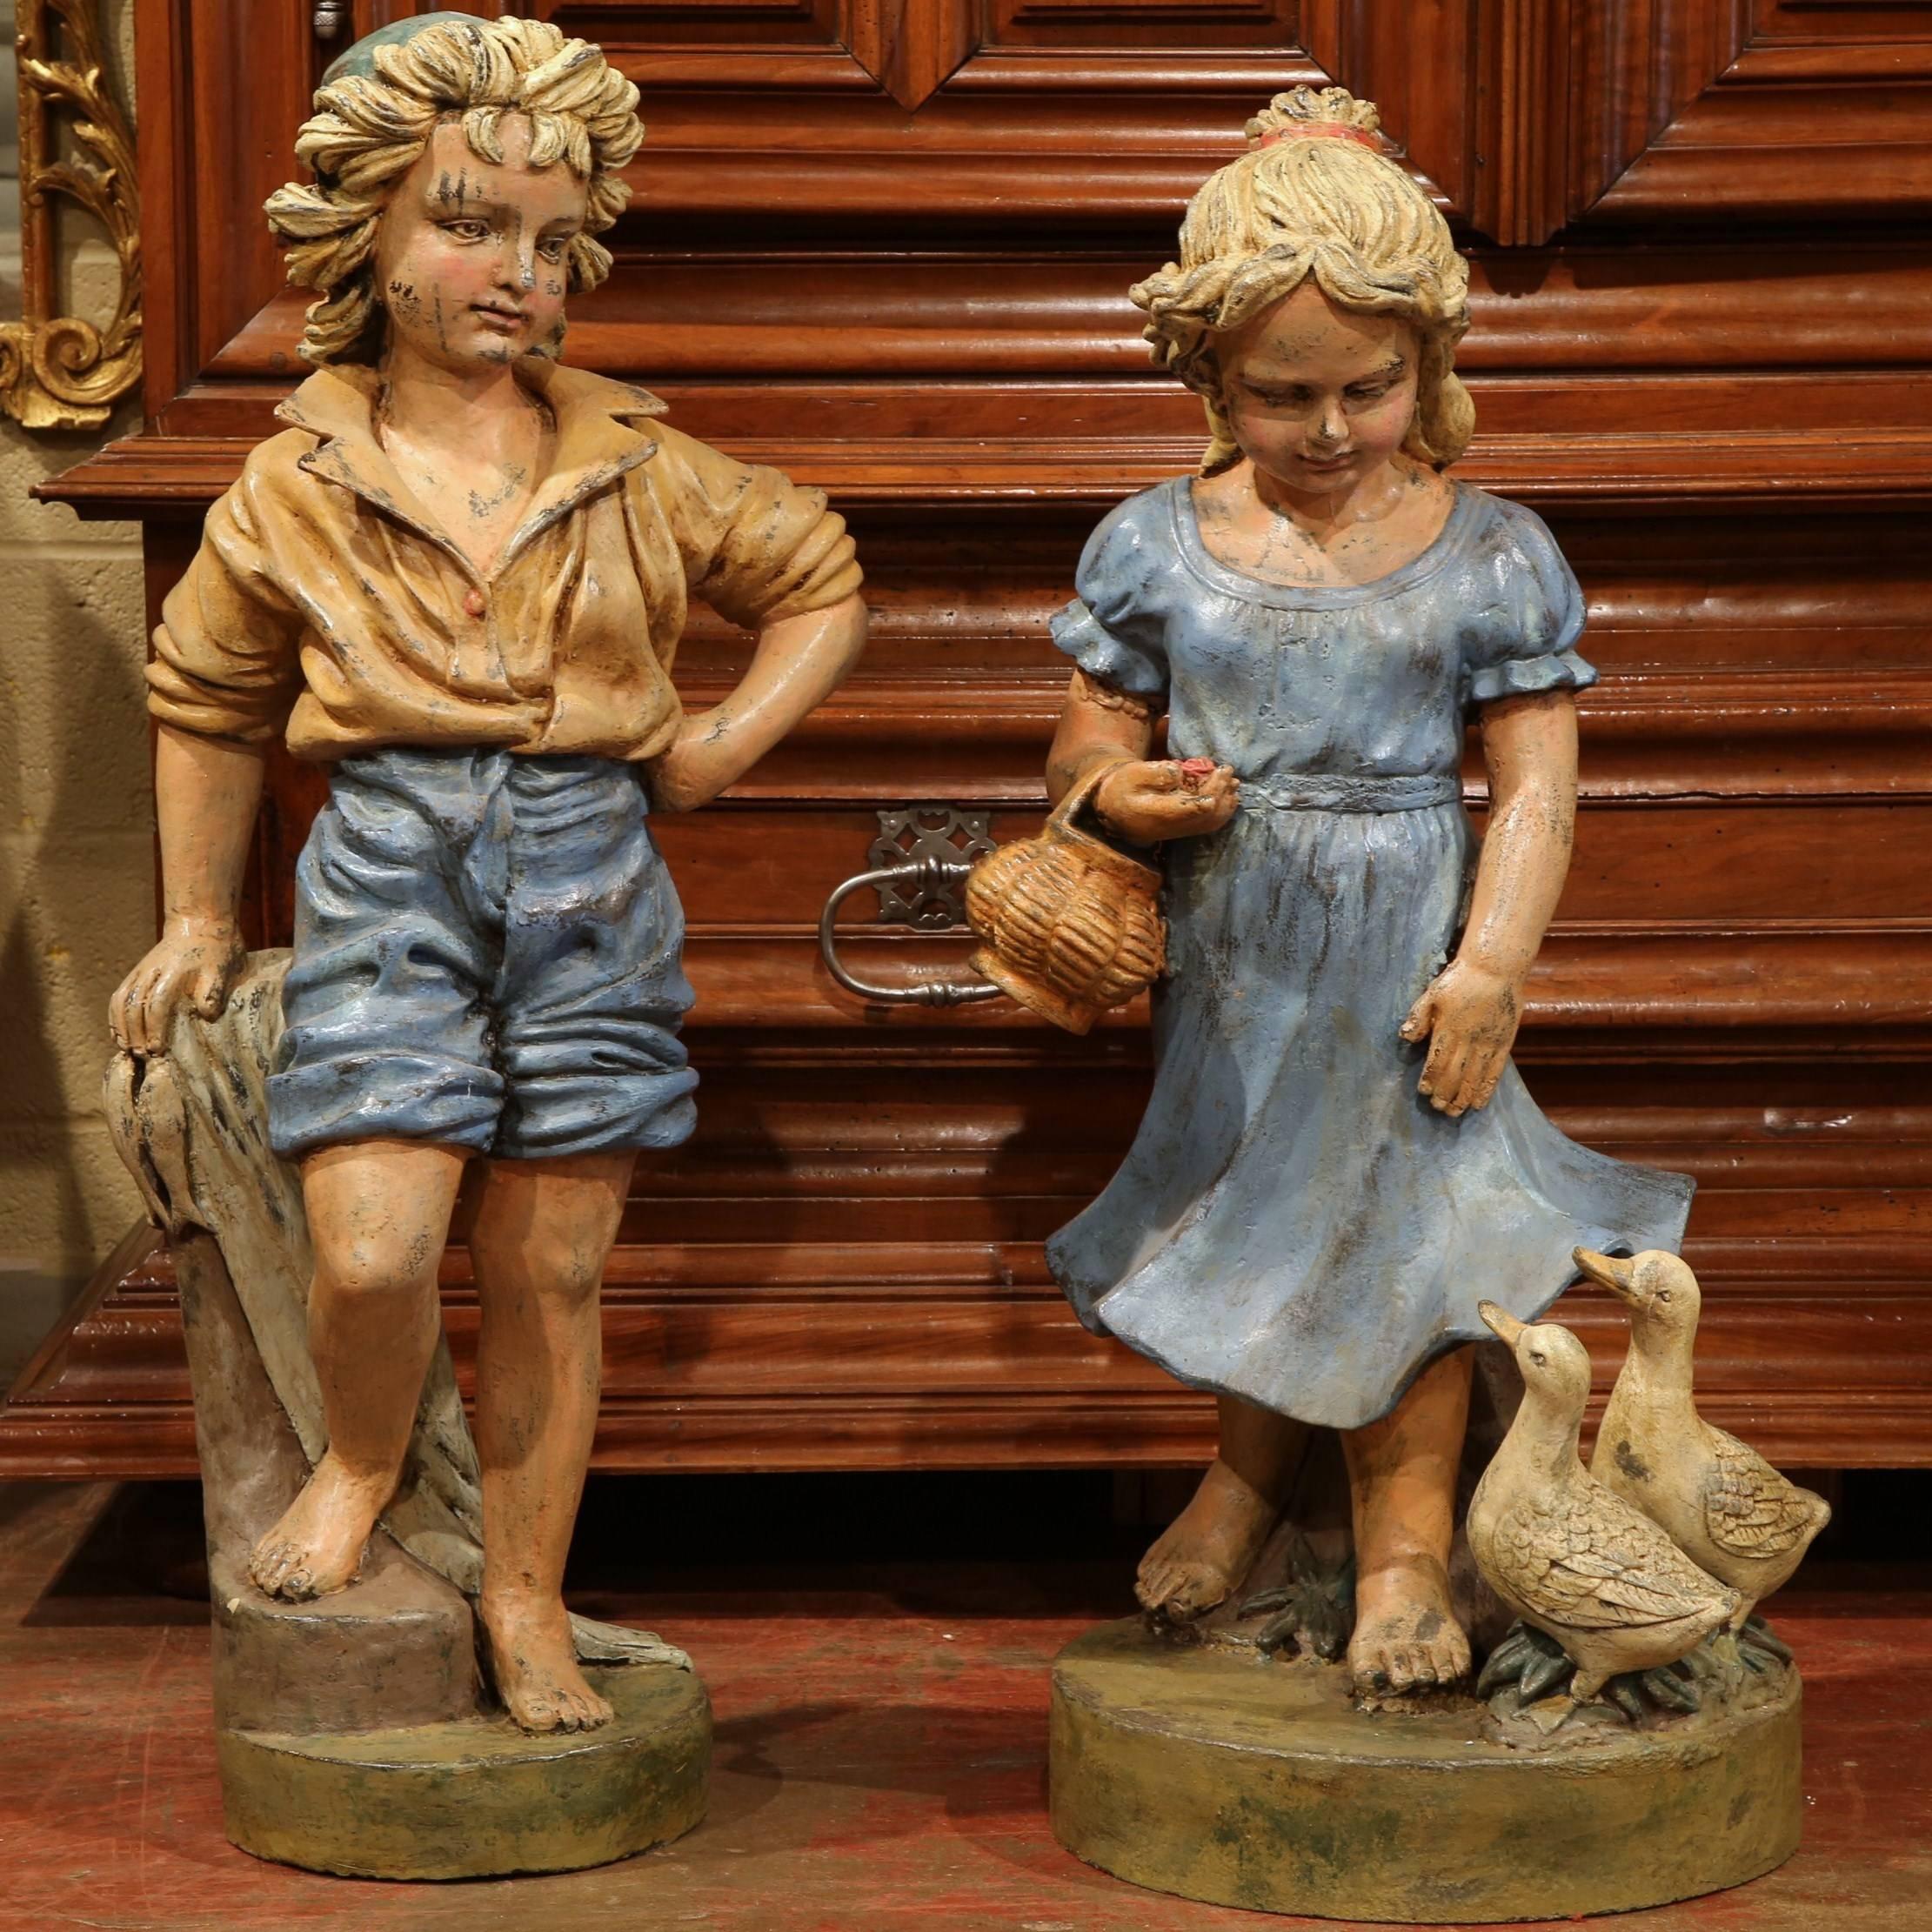 Add the charm of the French countryside to your home with this colorful pair of painted iron statues from Provence, France, circa 1970. The expressive figures depict a pair of children standing on round bases. The girl holds a basket with two ducks